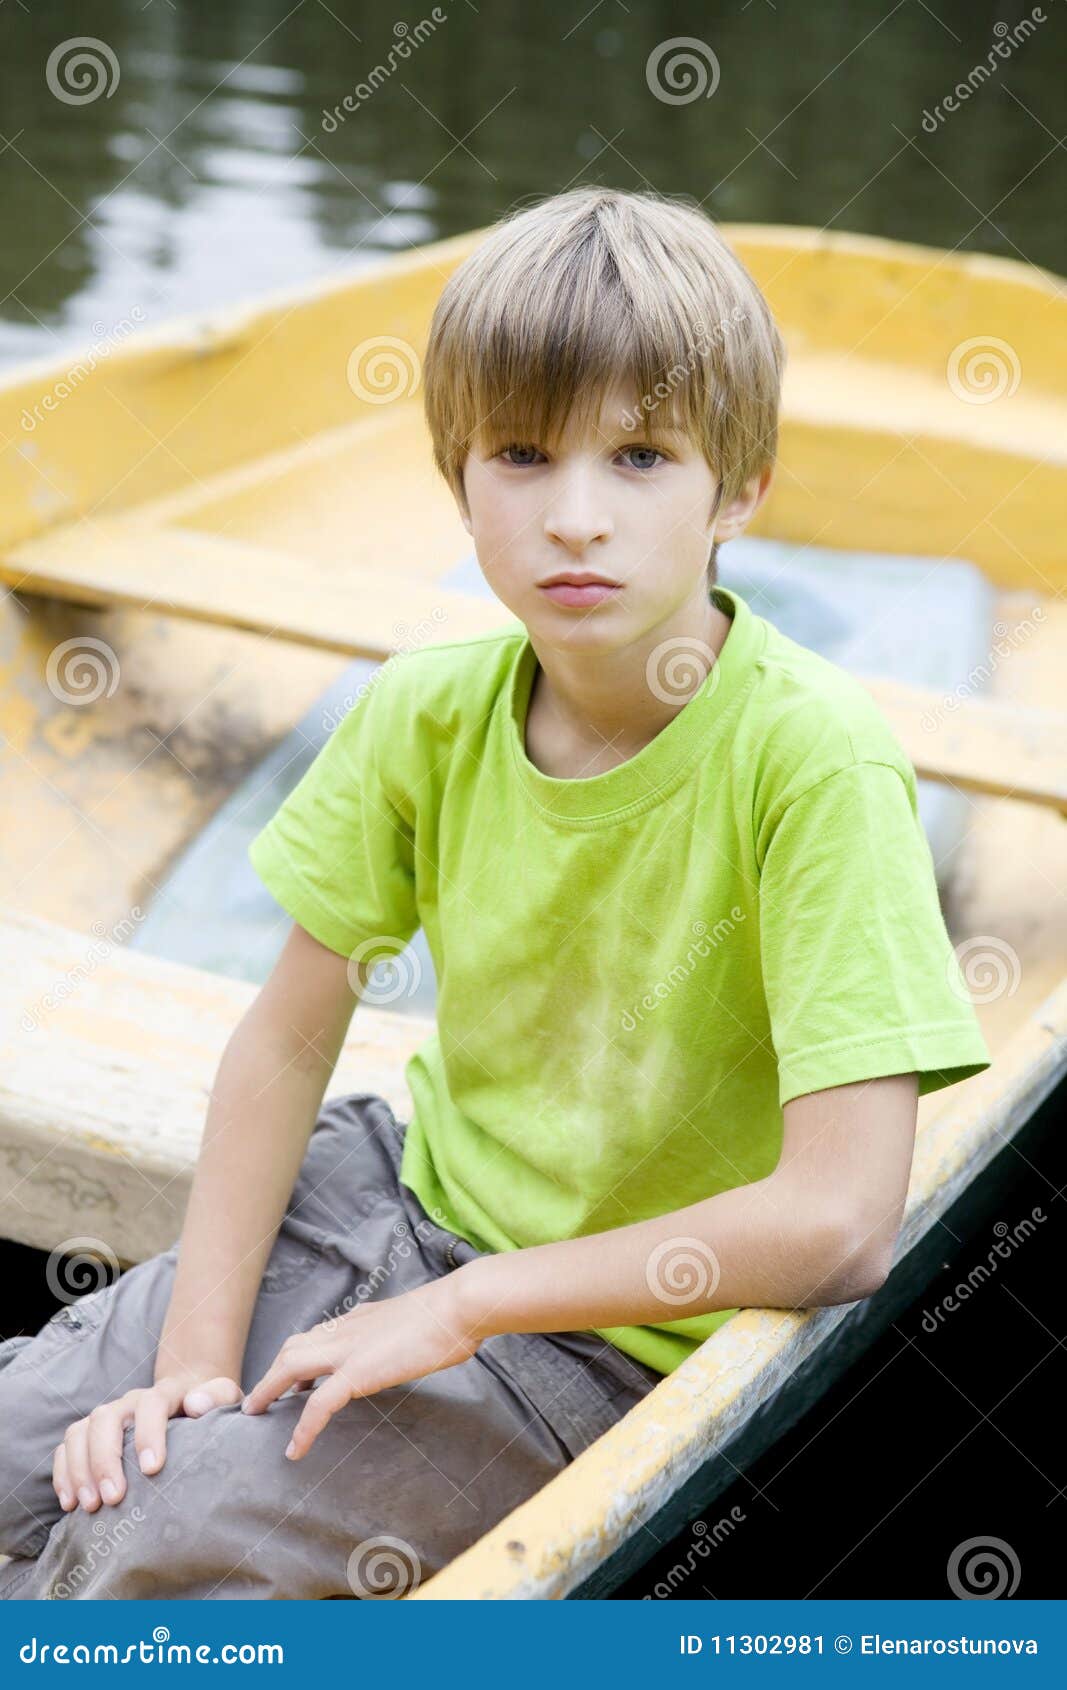 cute serious boy sitting in boat stock image - image of